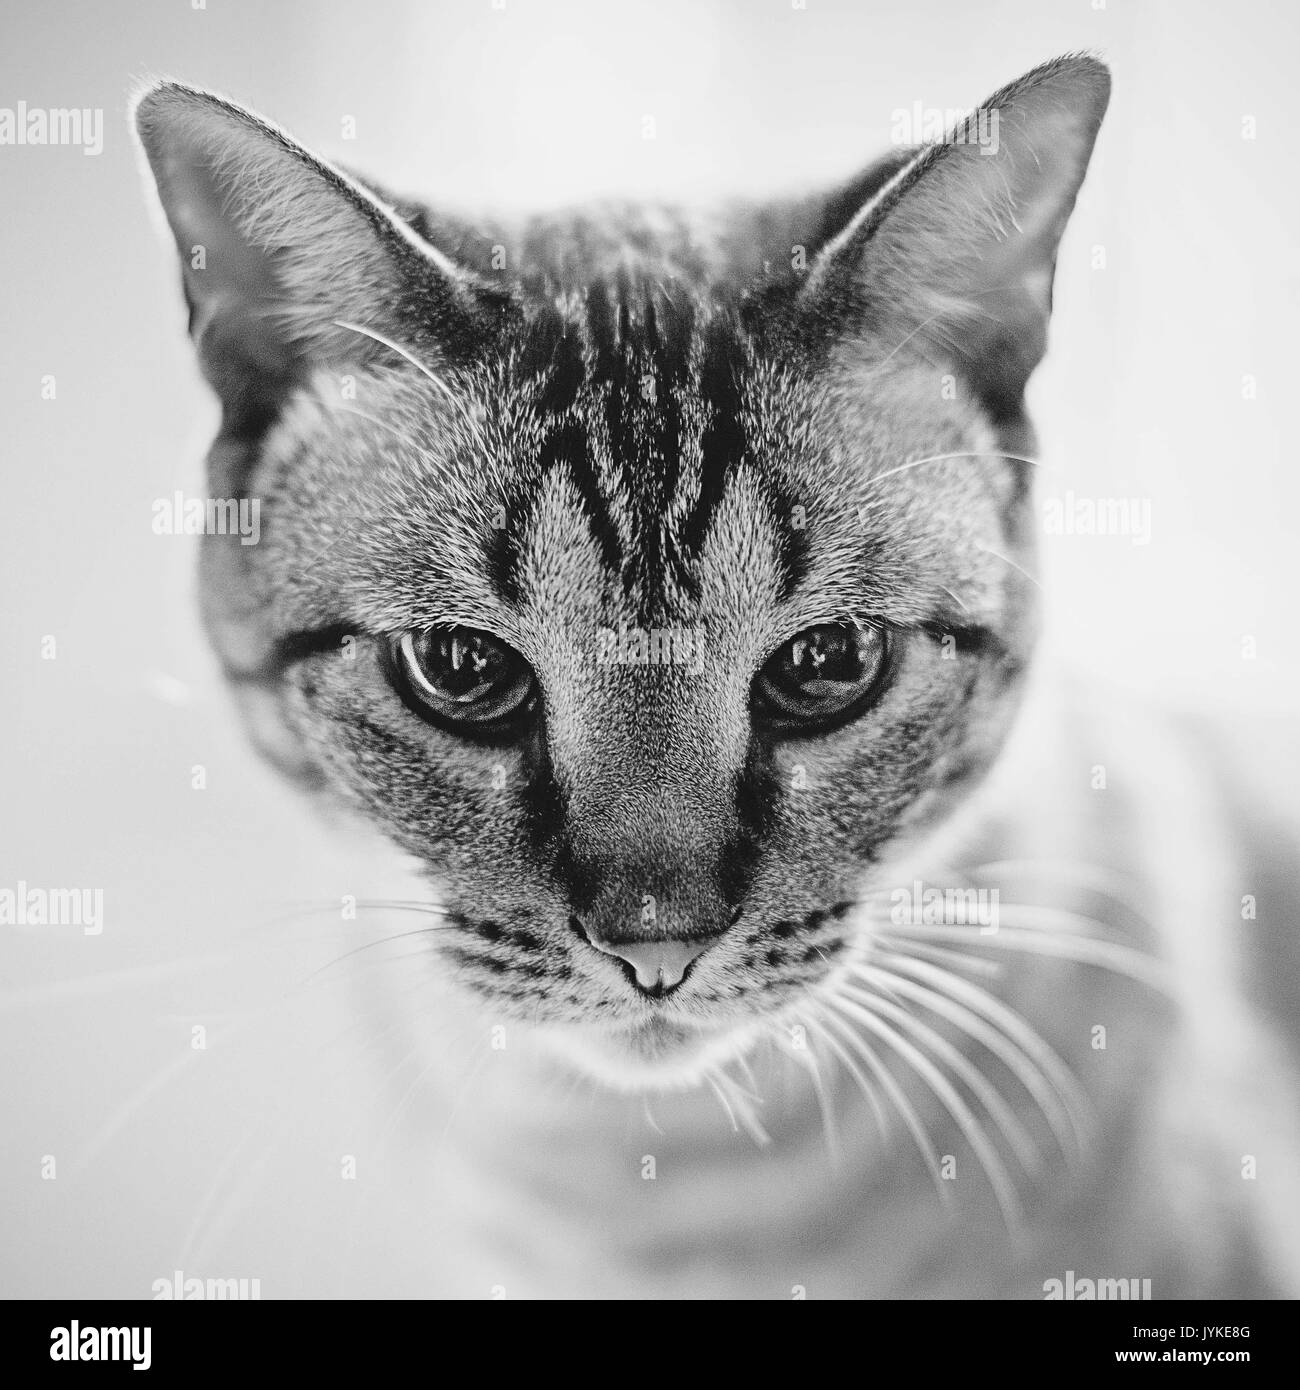 tabby cat face closeup black and white Stock Photo